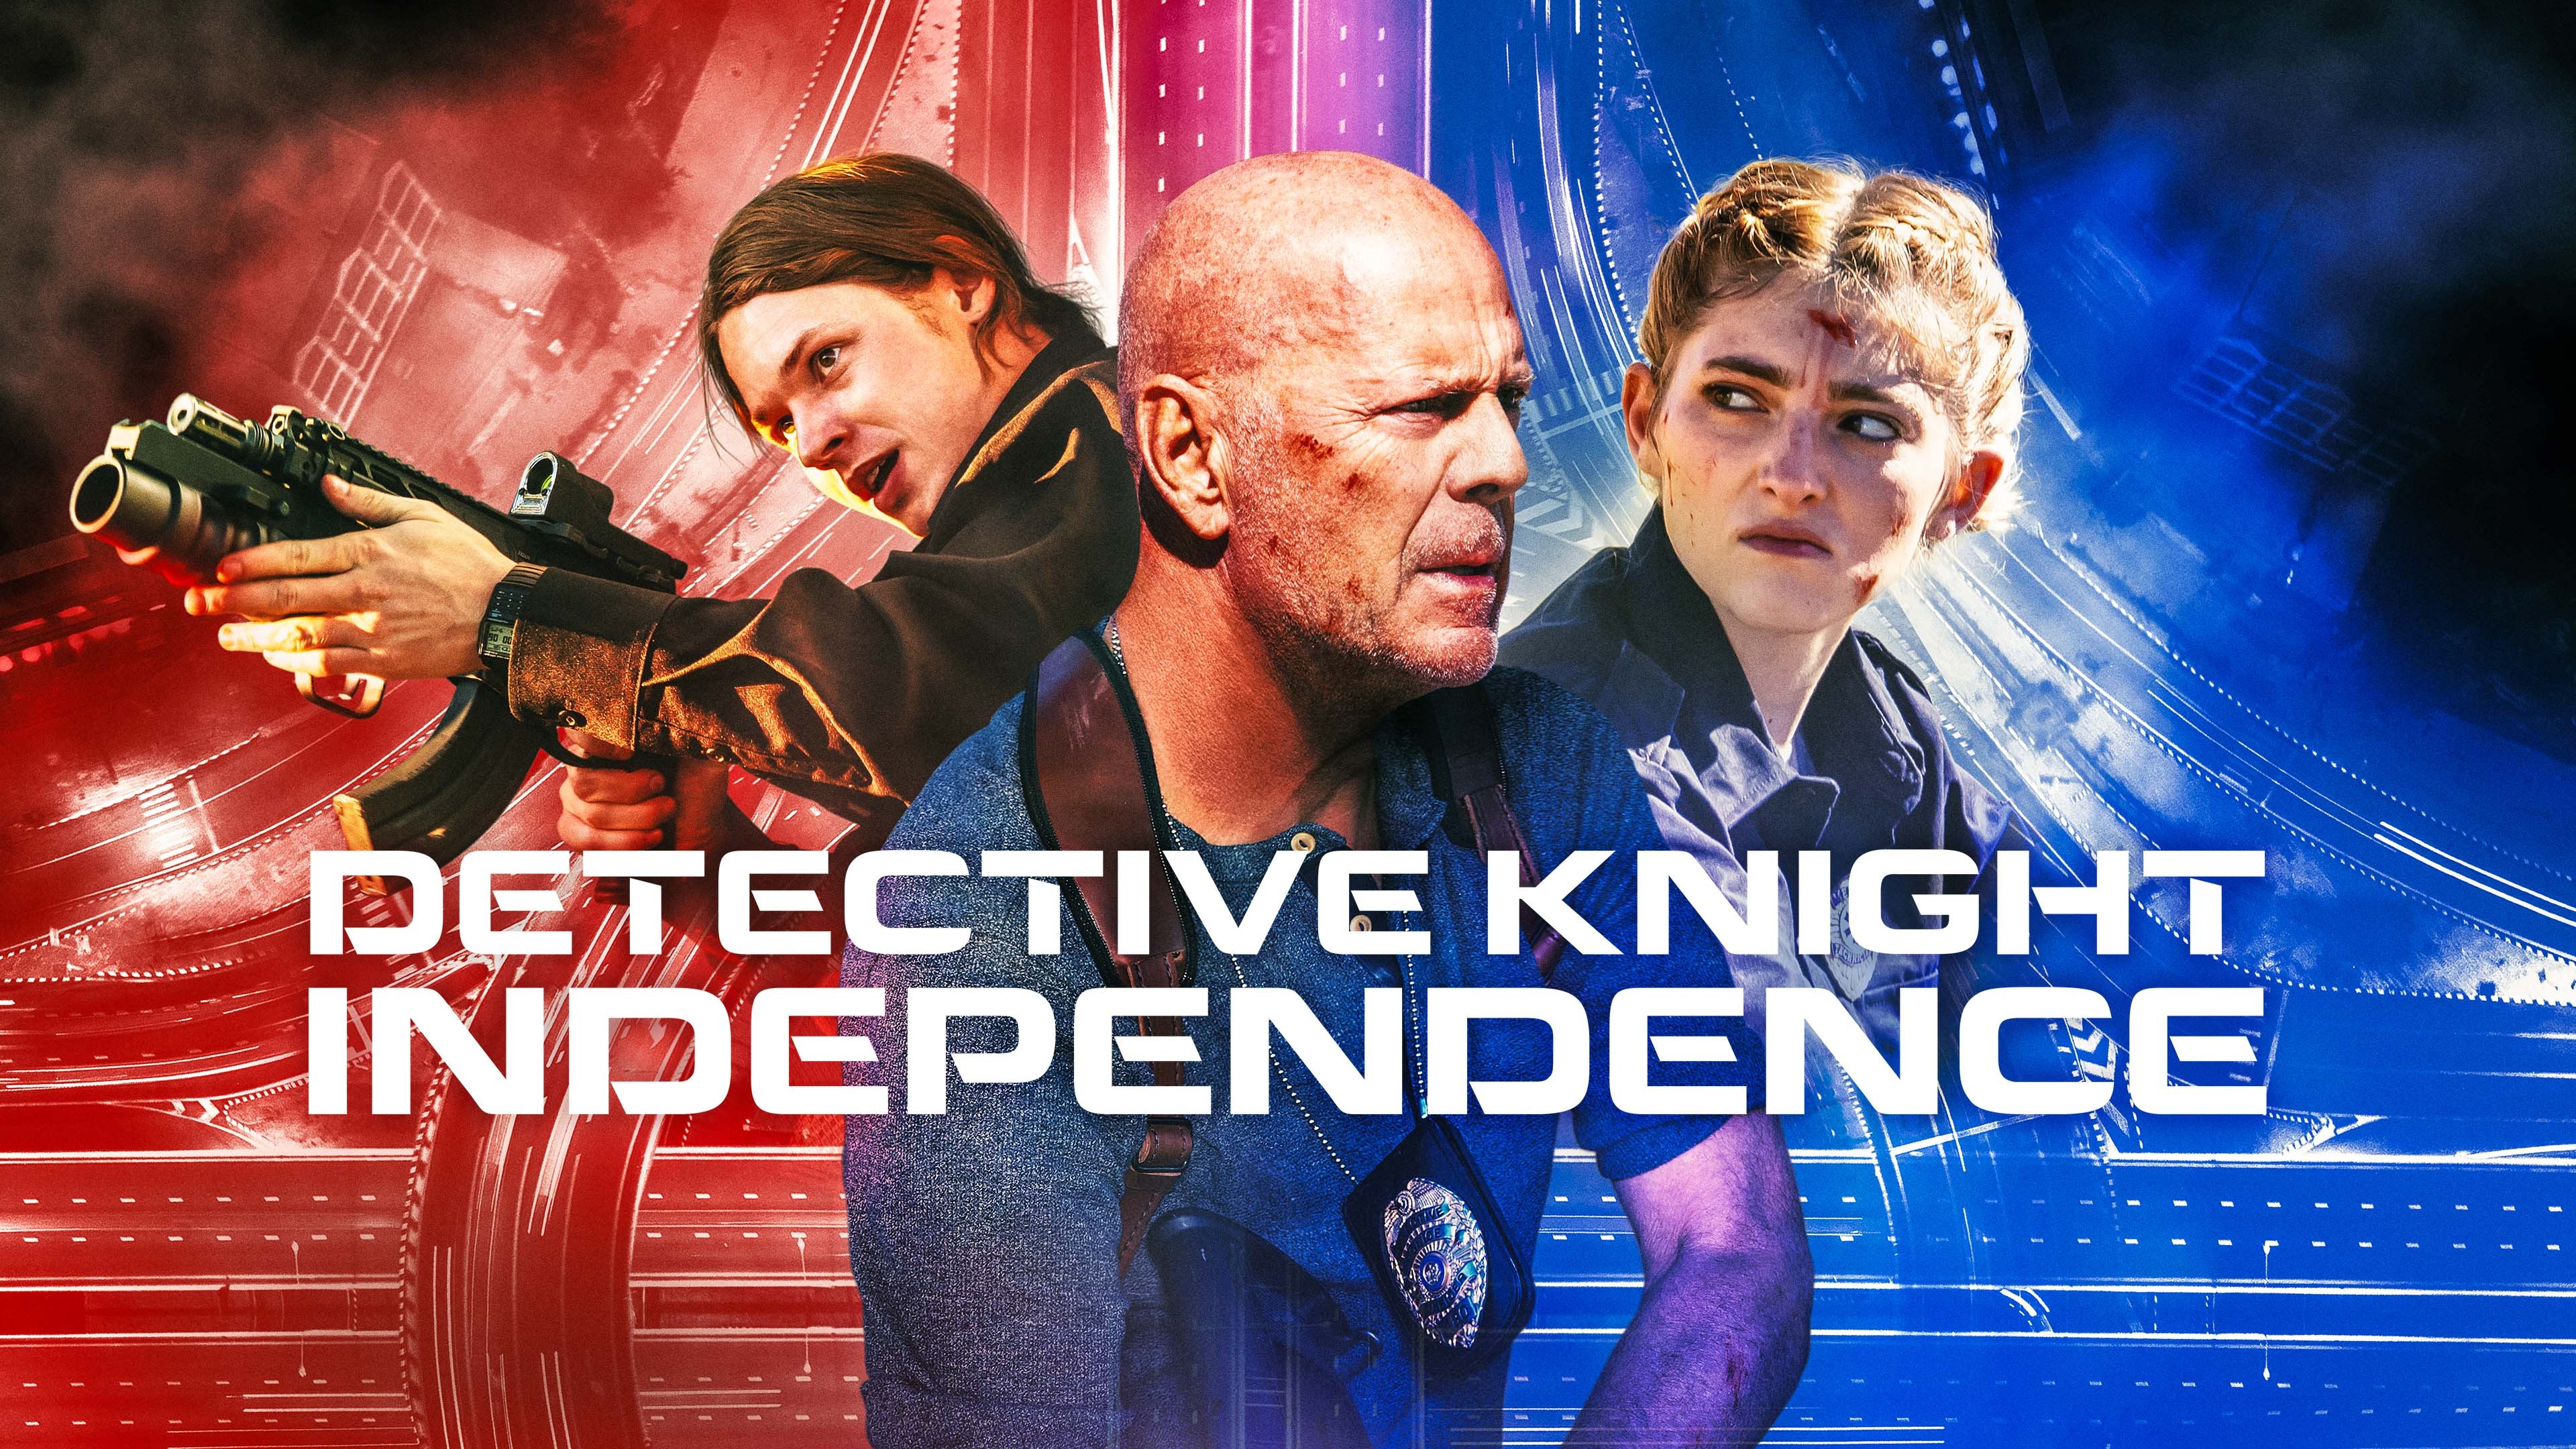 Detective Knight 2: Independence - VJ ice P